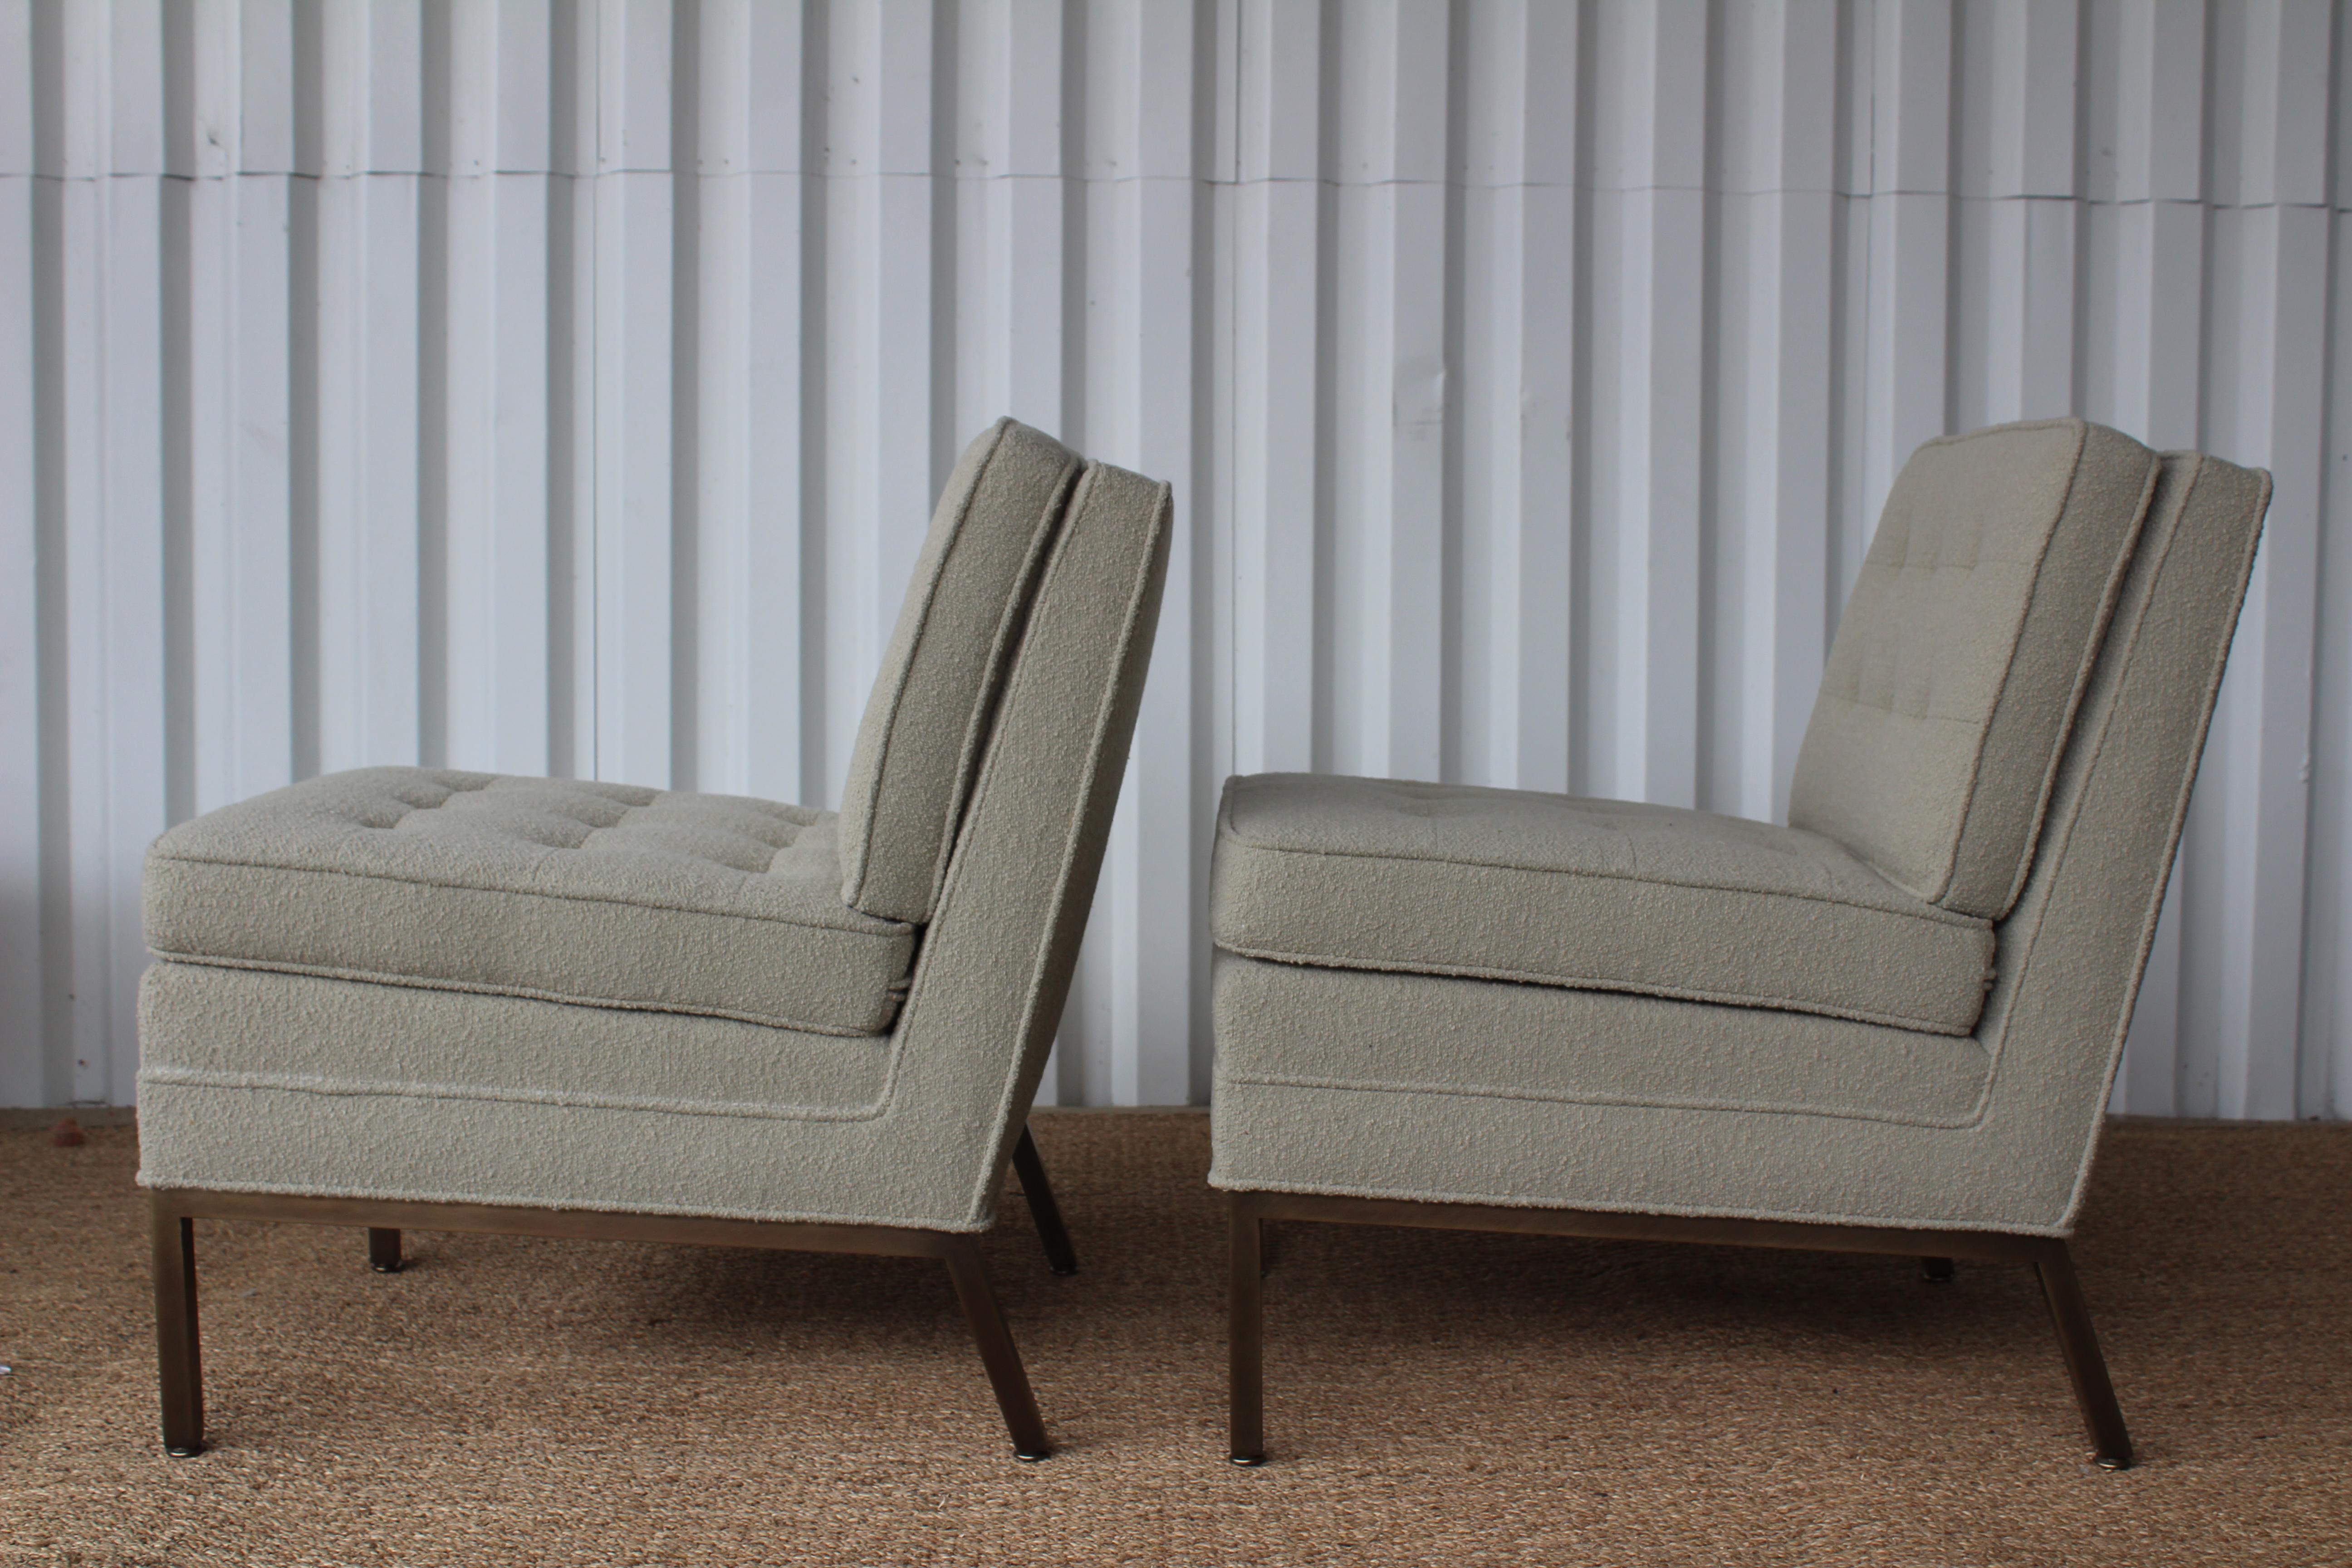 Mid-Century Modern Pair of Slipper Chairs in the style of Florence Knoll, USA, 1950s